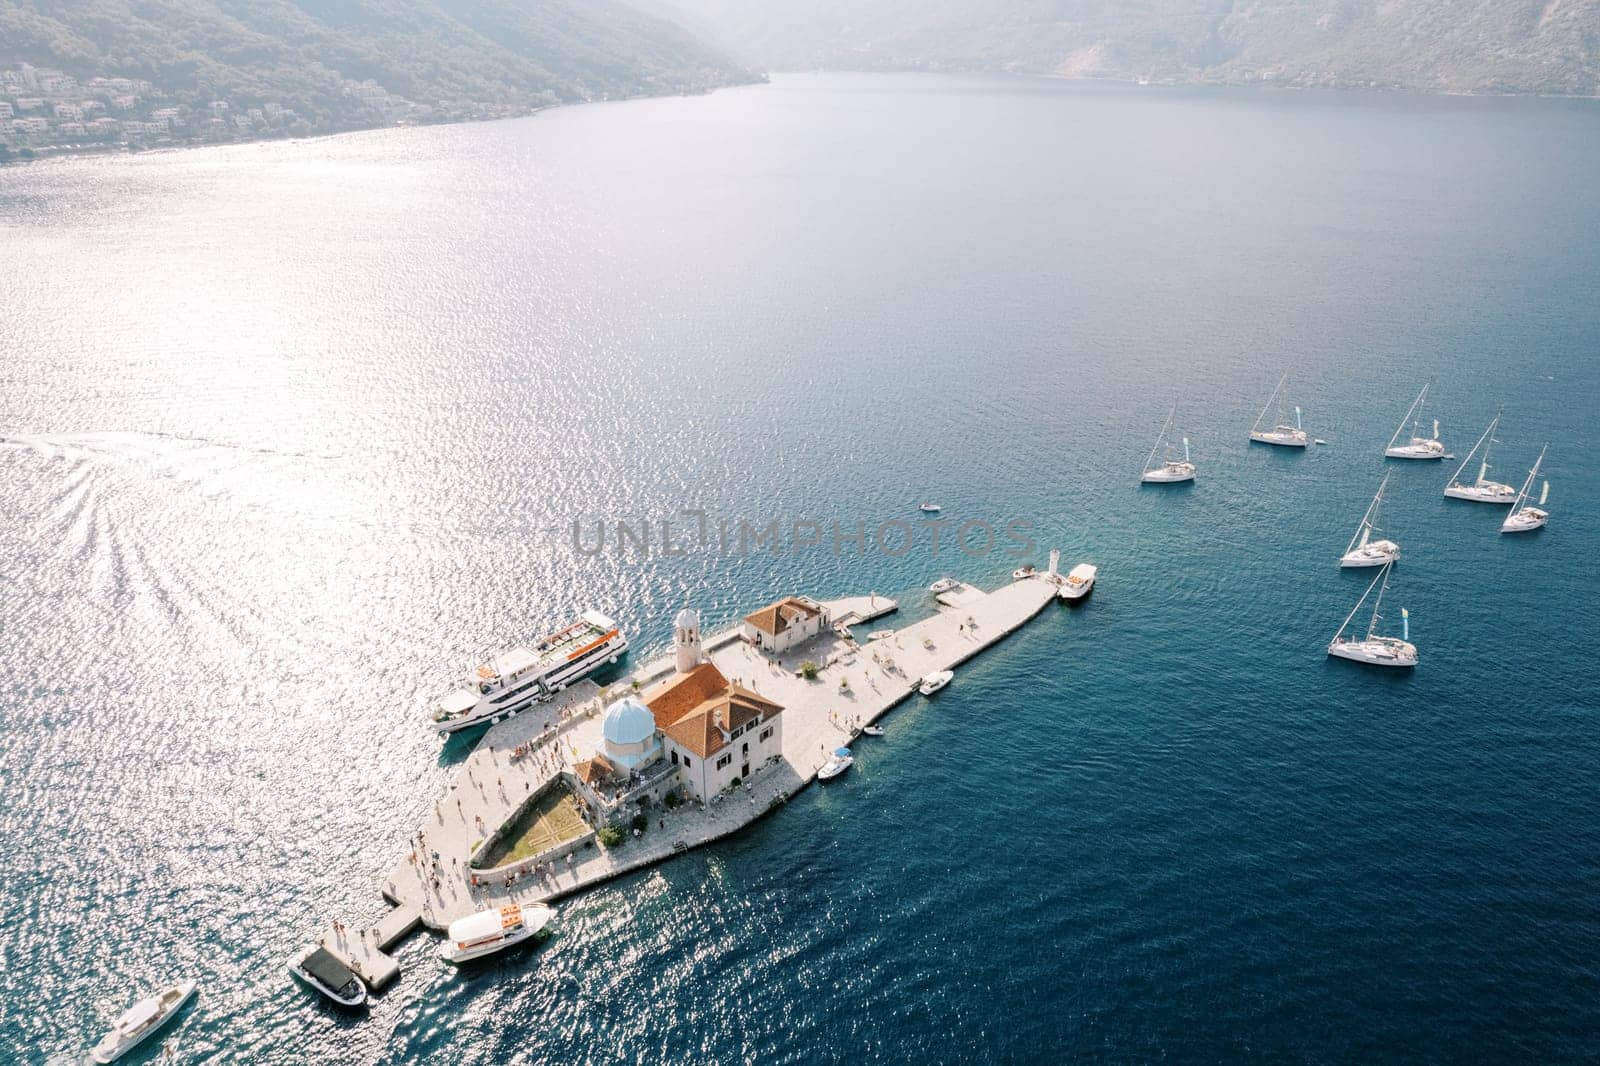 Motor boats and sailboats are moored around the island of Gospa od Skrpjela. Montenegro. Drone by Nadtochiy